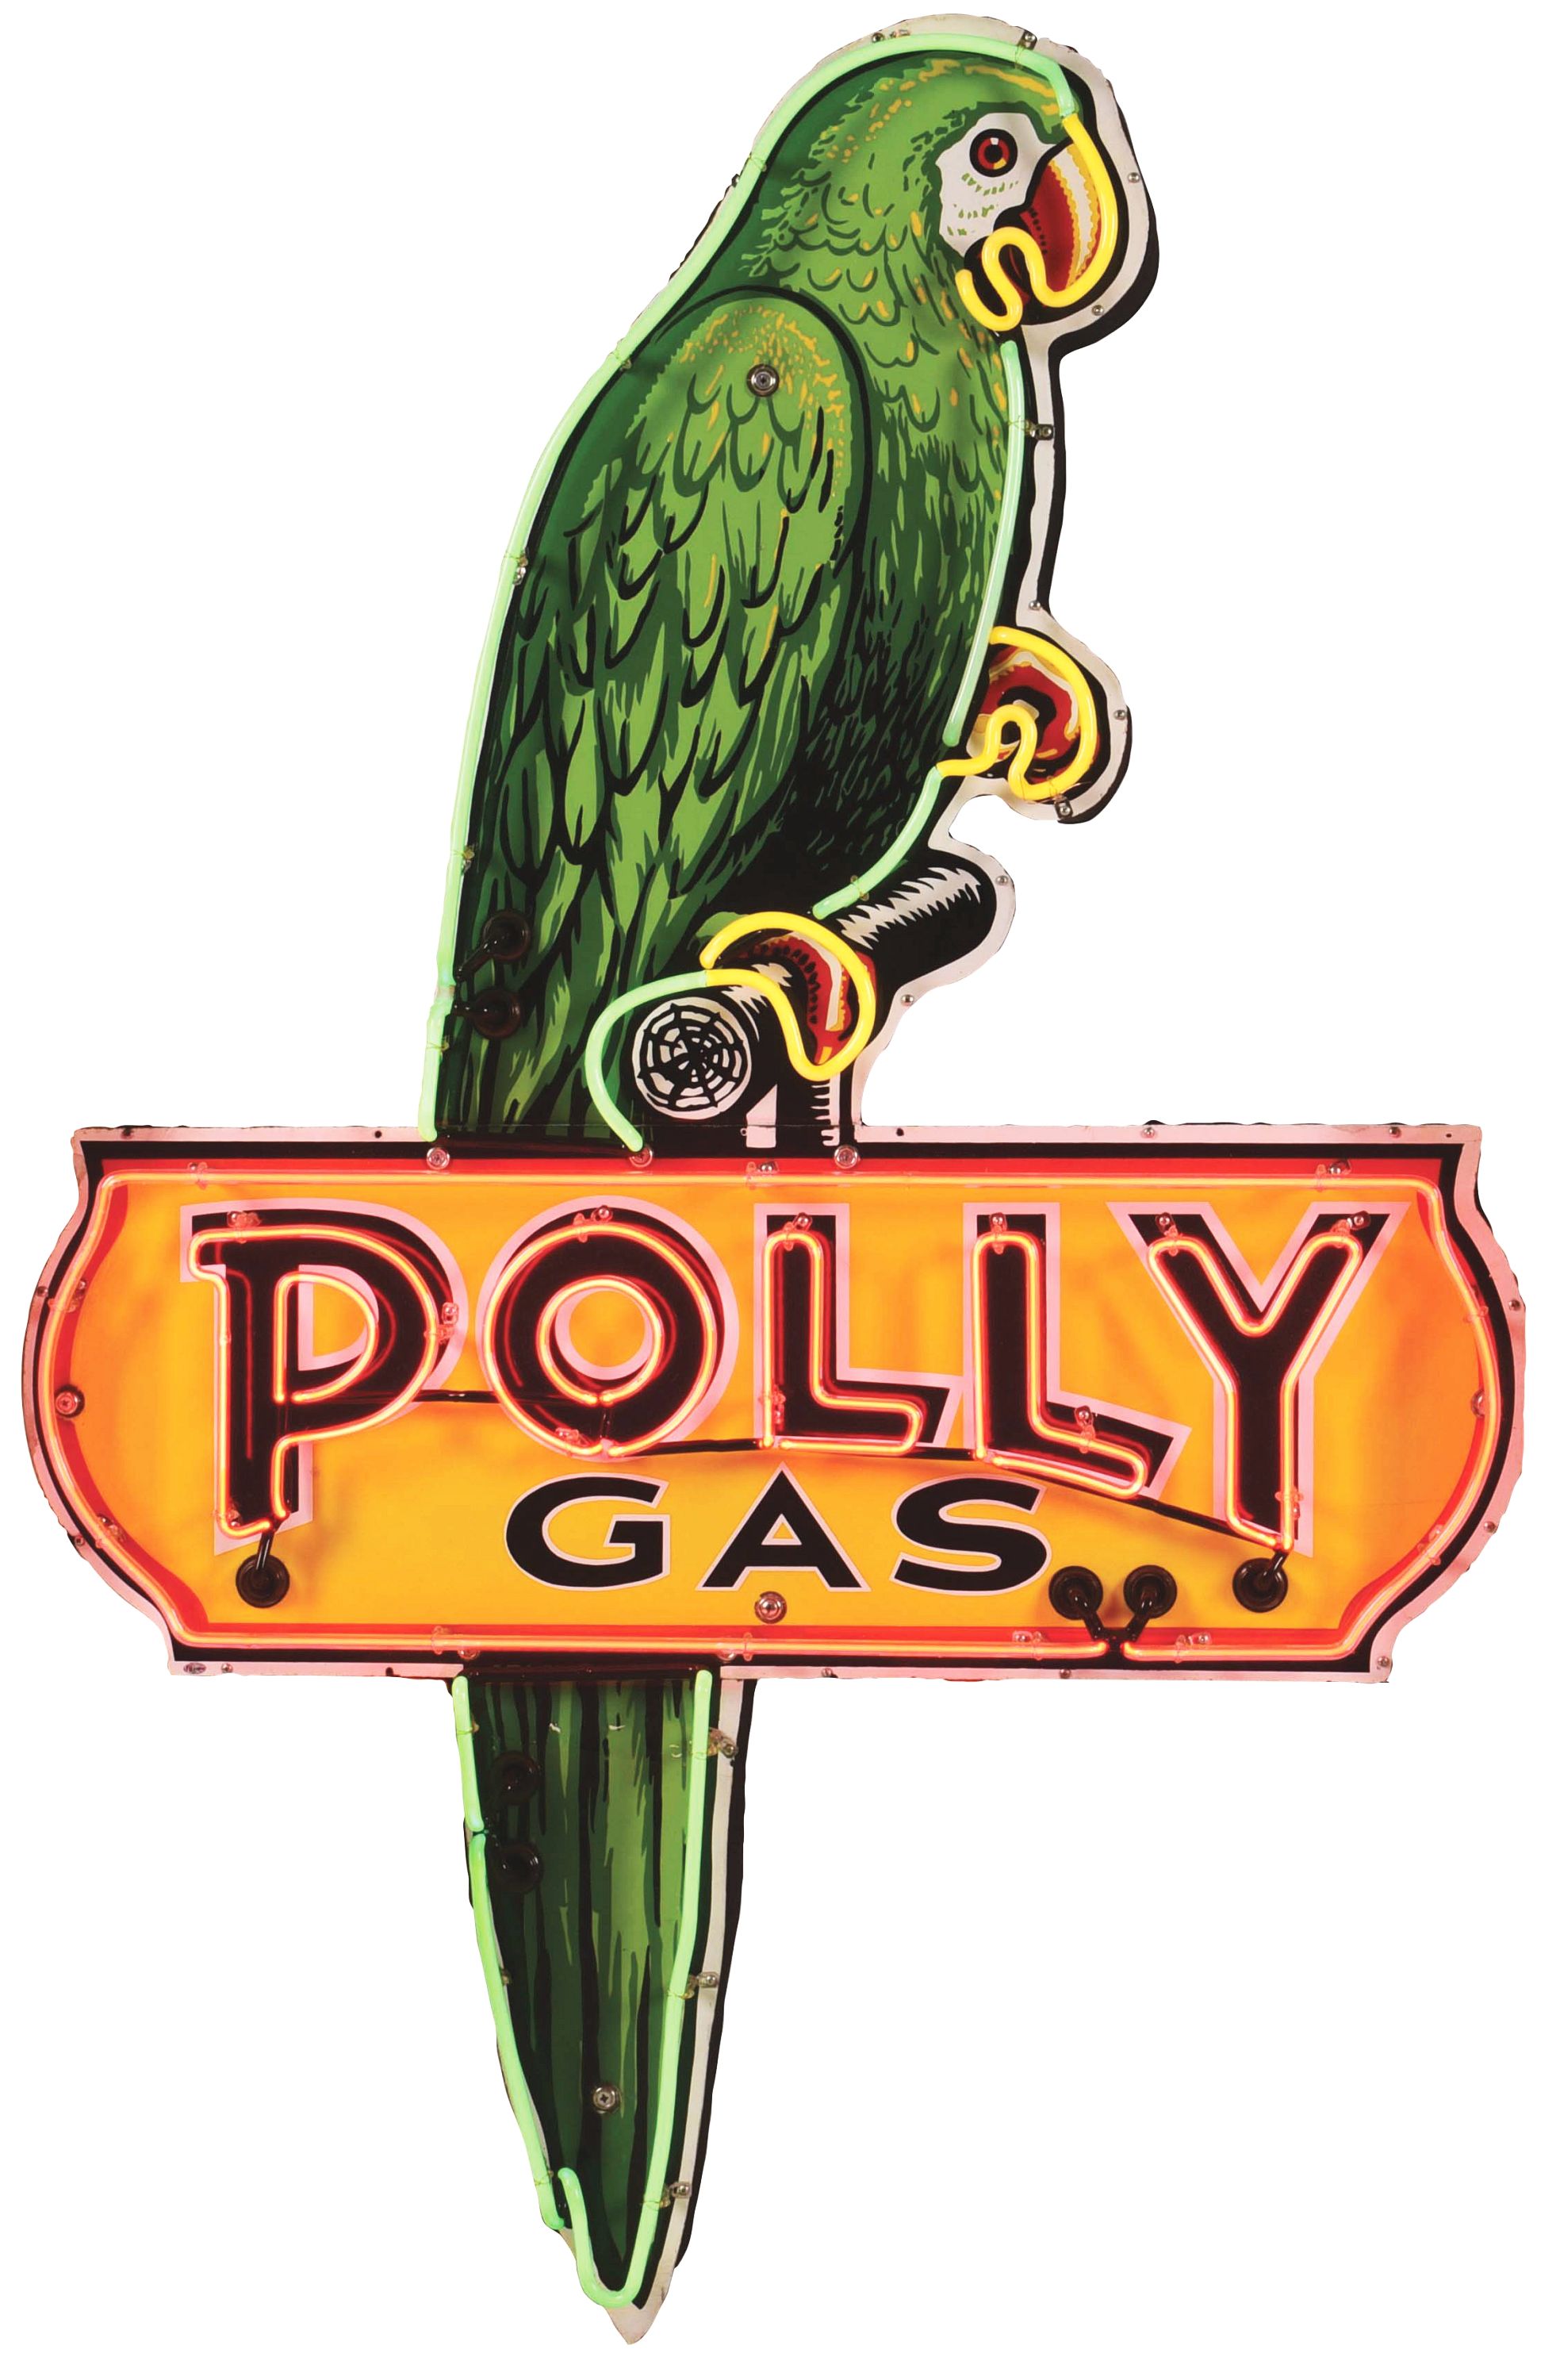 Polly Gas neon sign, which sold for $138,000 at Morphy.